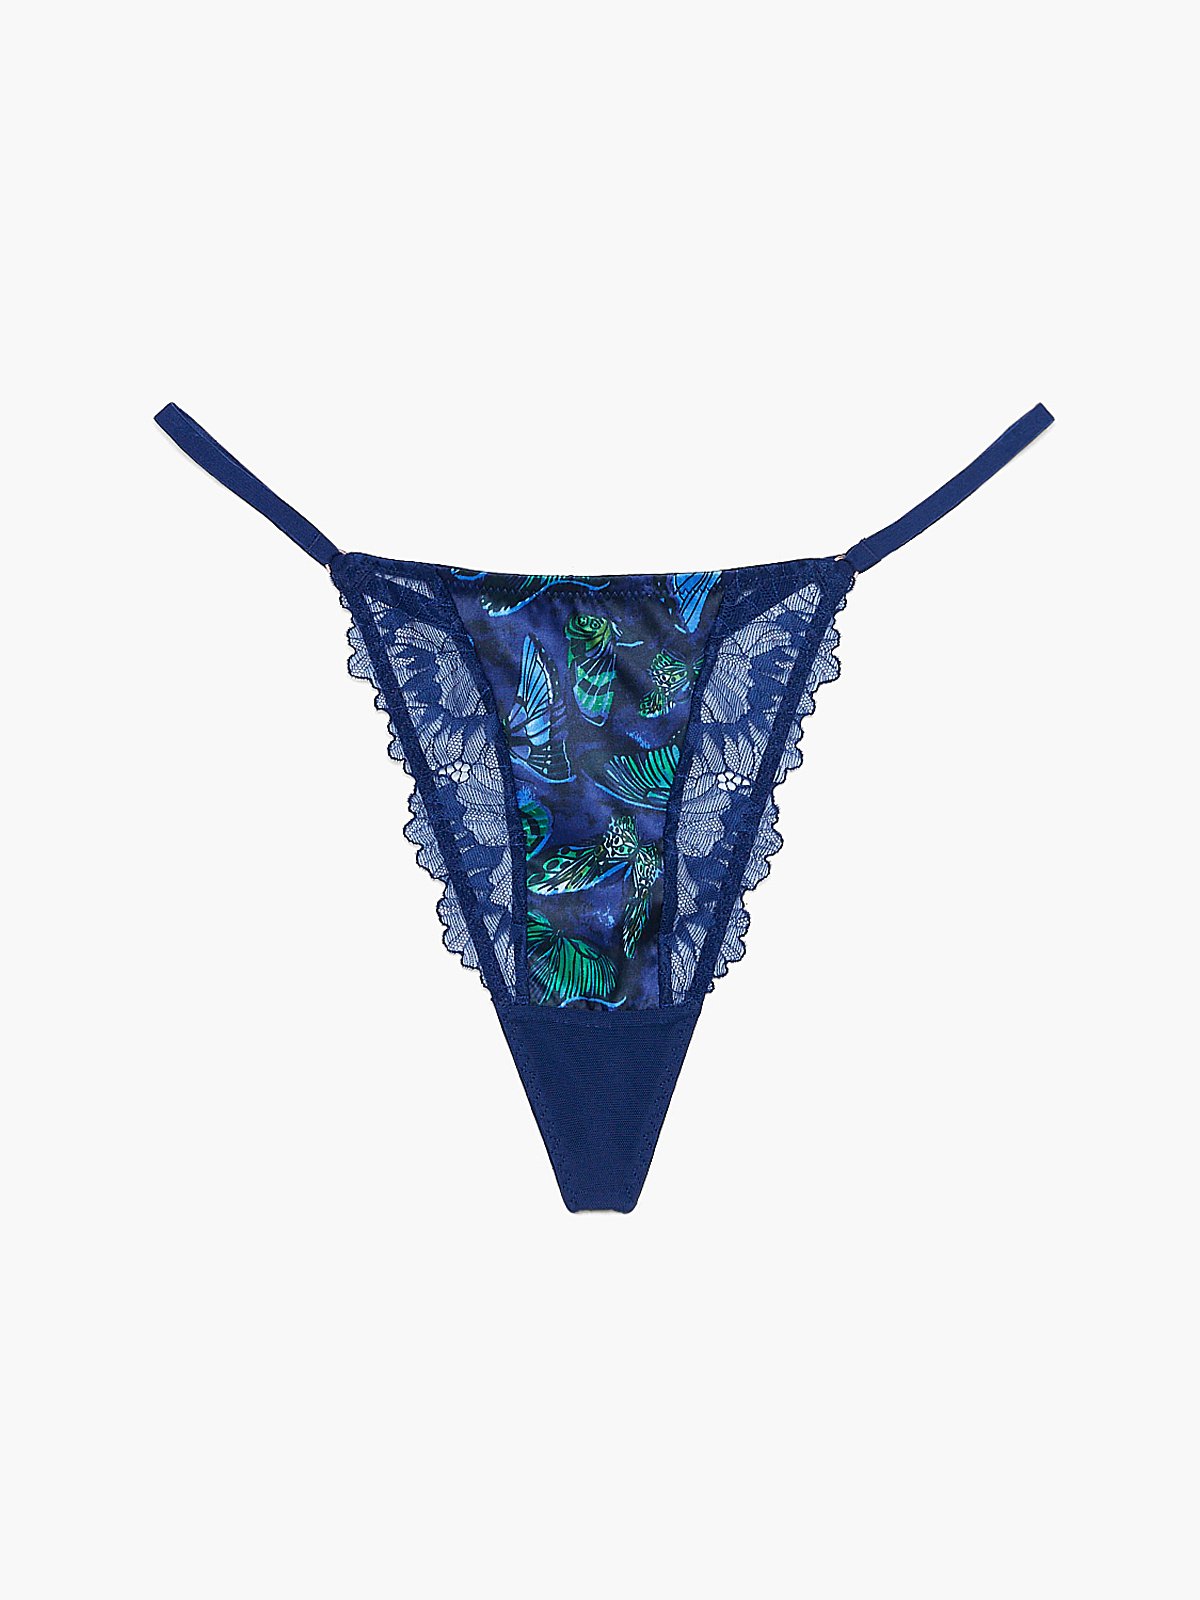 Baroque Butterfly Lace G-String Panty in Blue & Multi | SAVAGE X FENTY